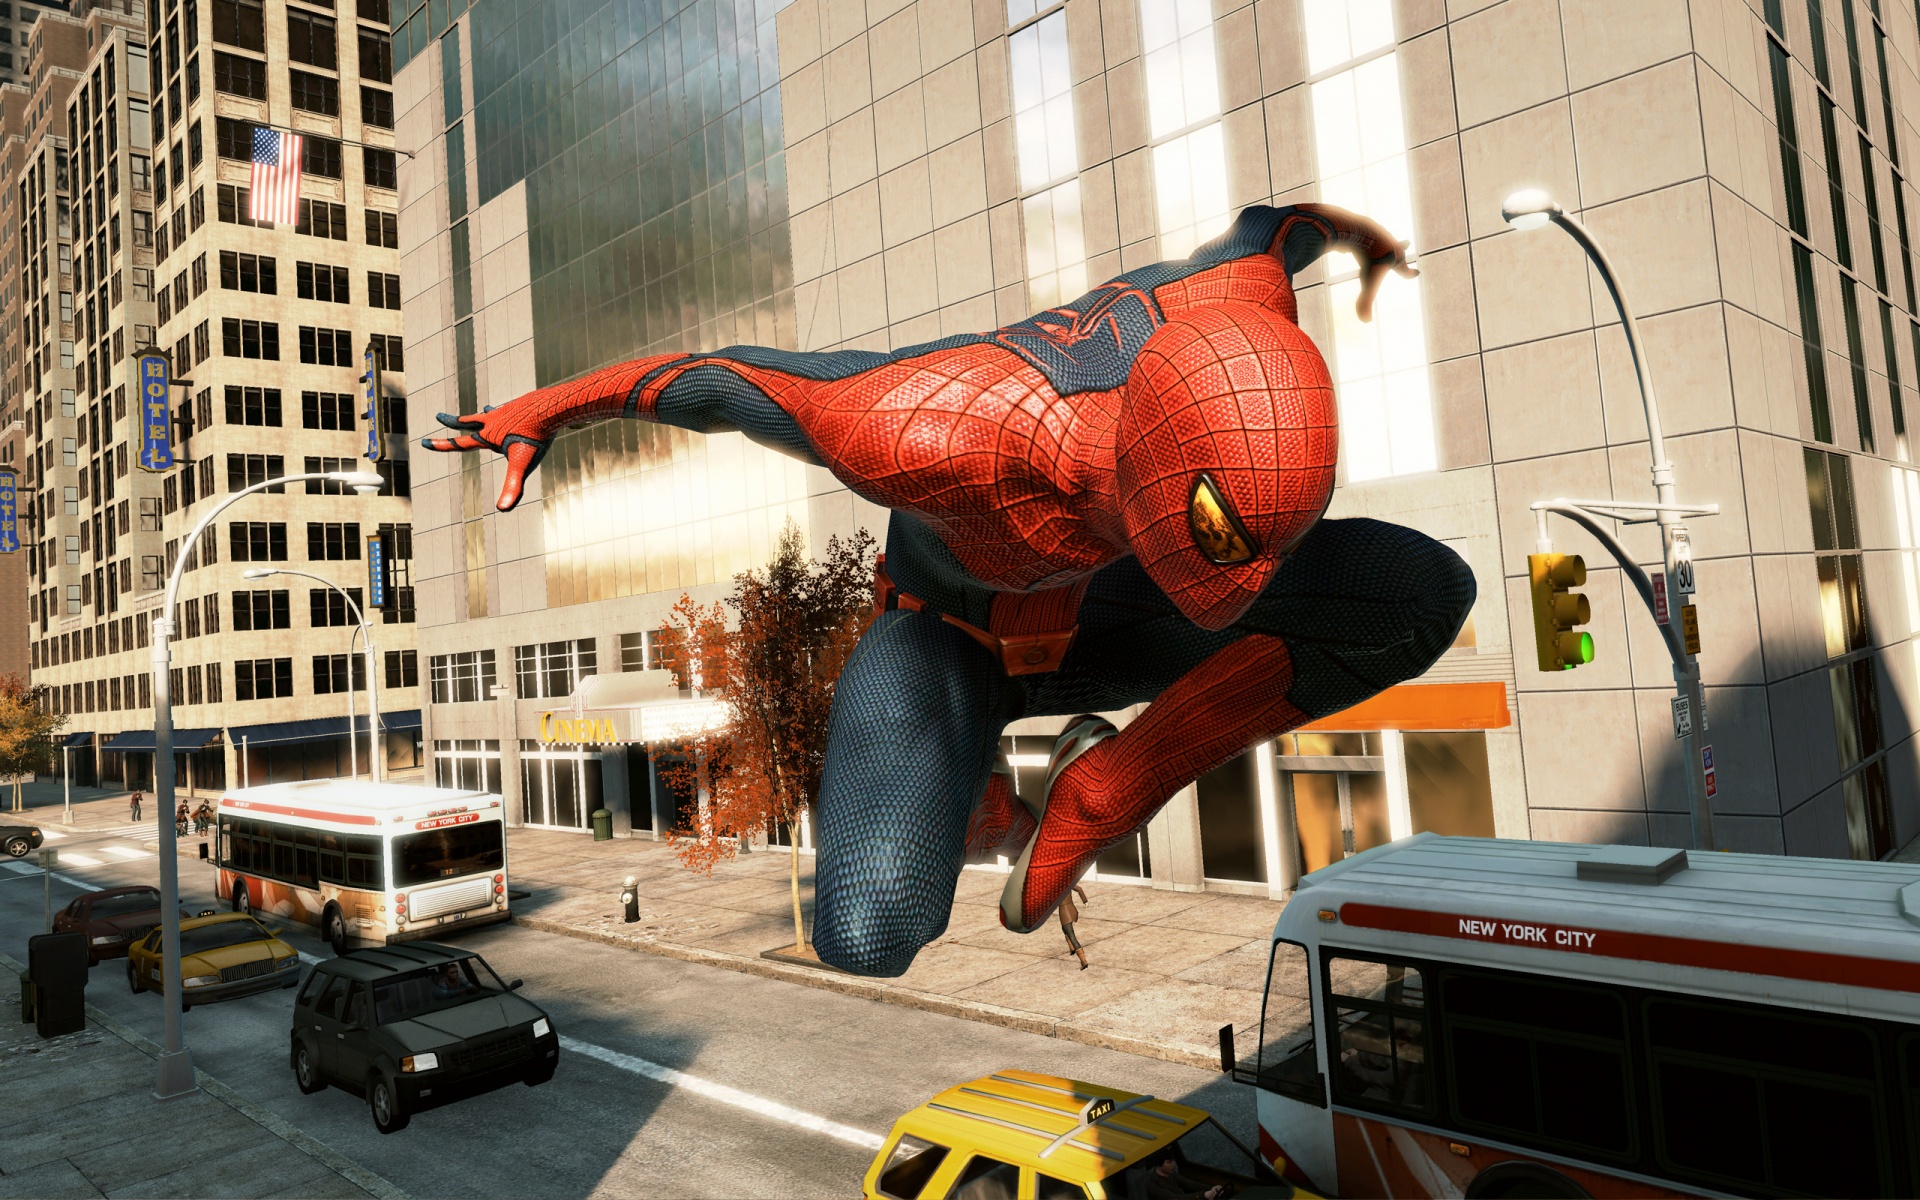 10+ The Amazing Spider-Man HD Wallpapers and Backgrounds